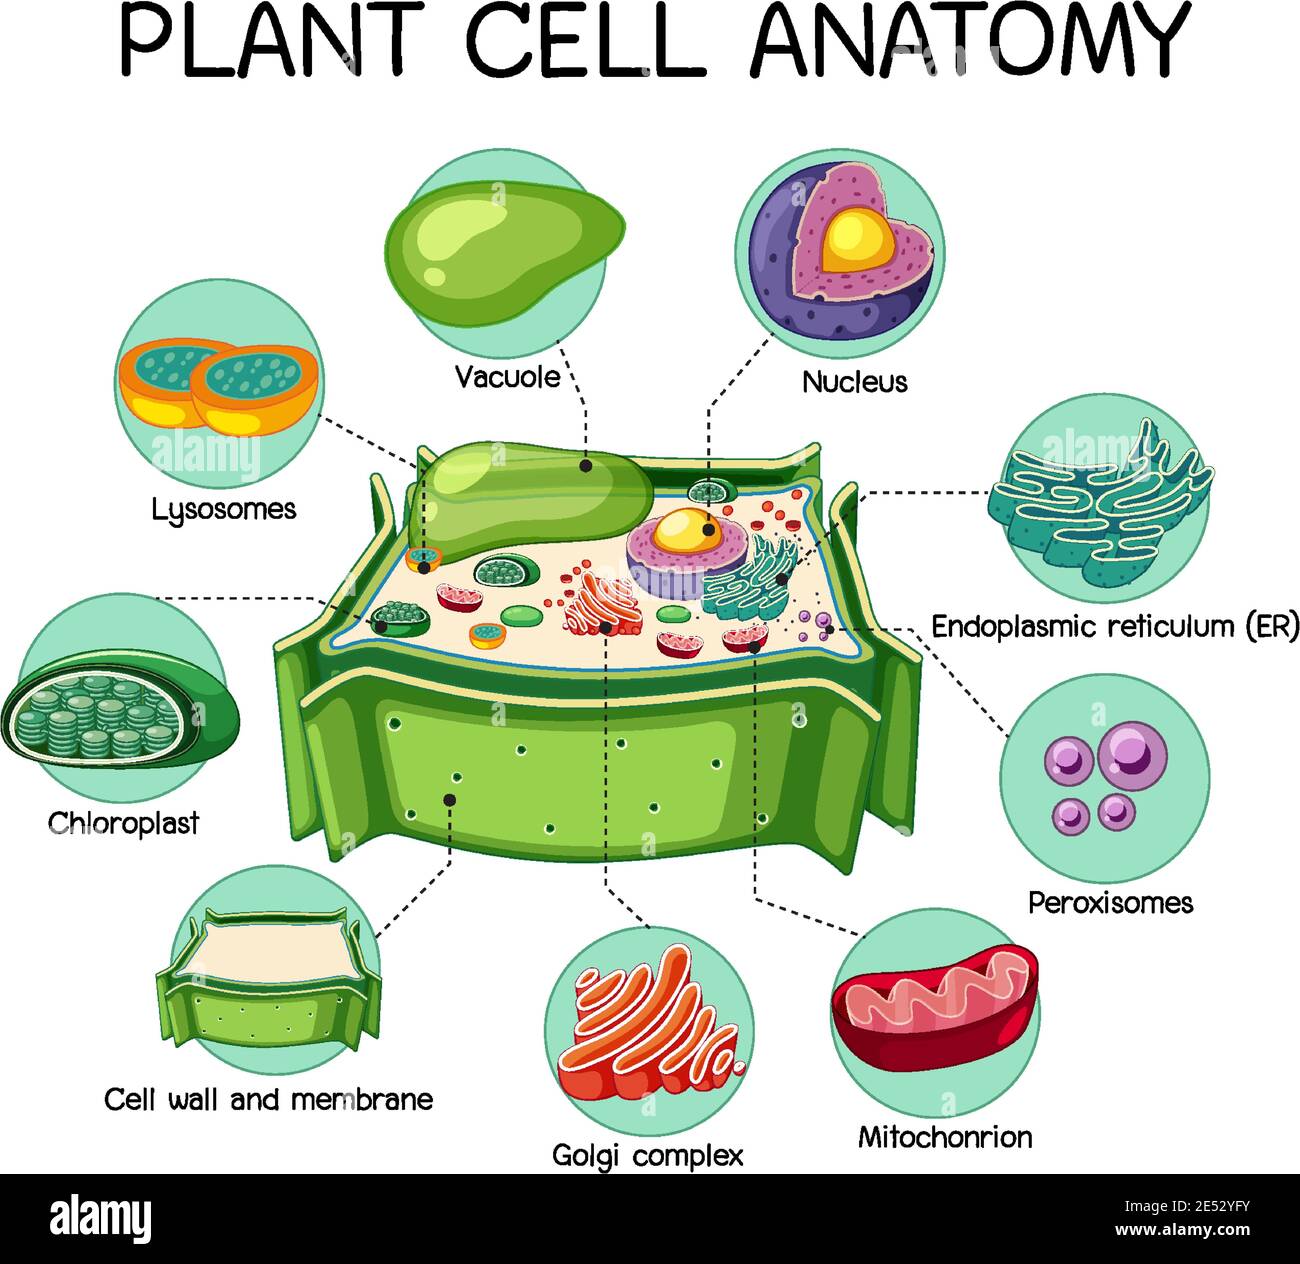 Anatomy of plant cell (Biology Diagram) illustration Stock Vector